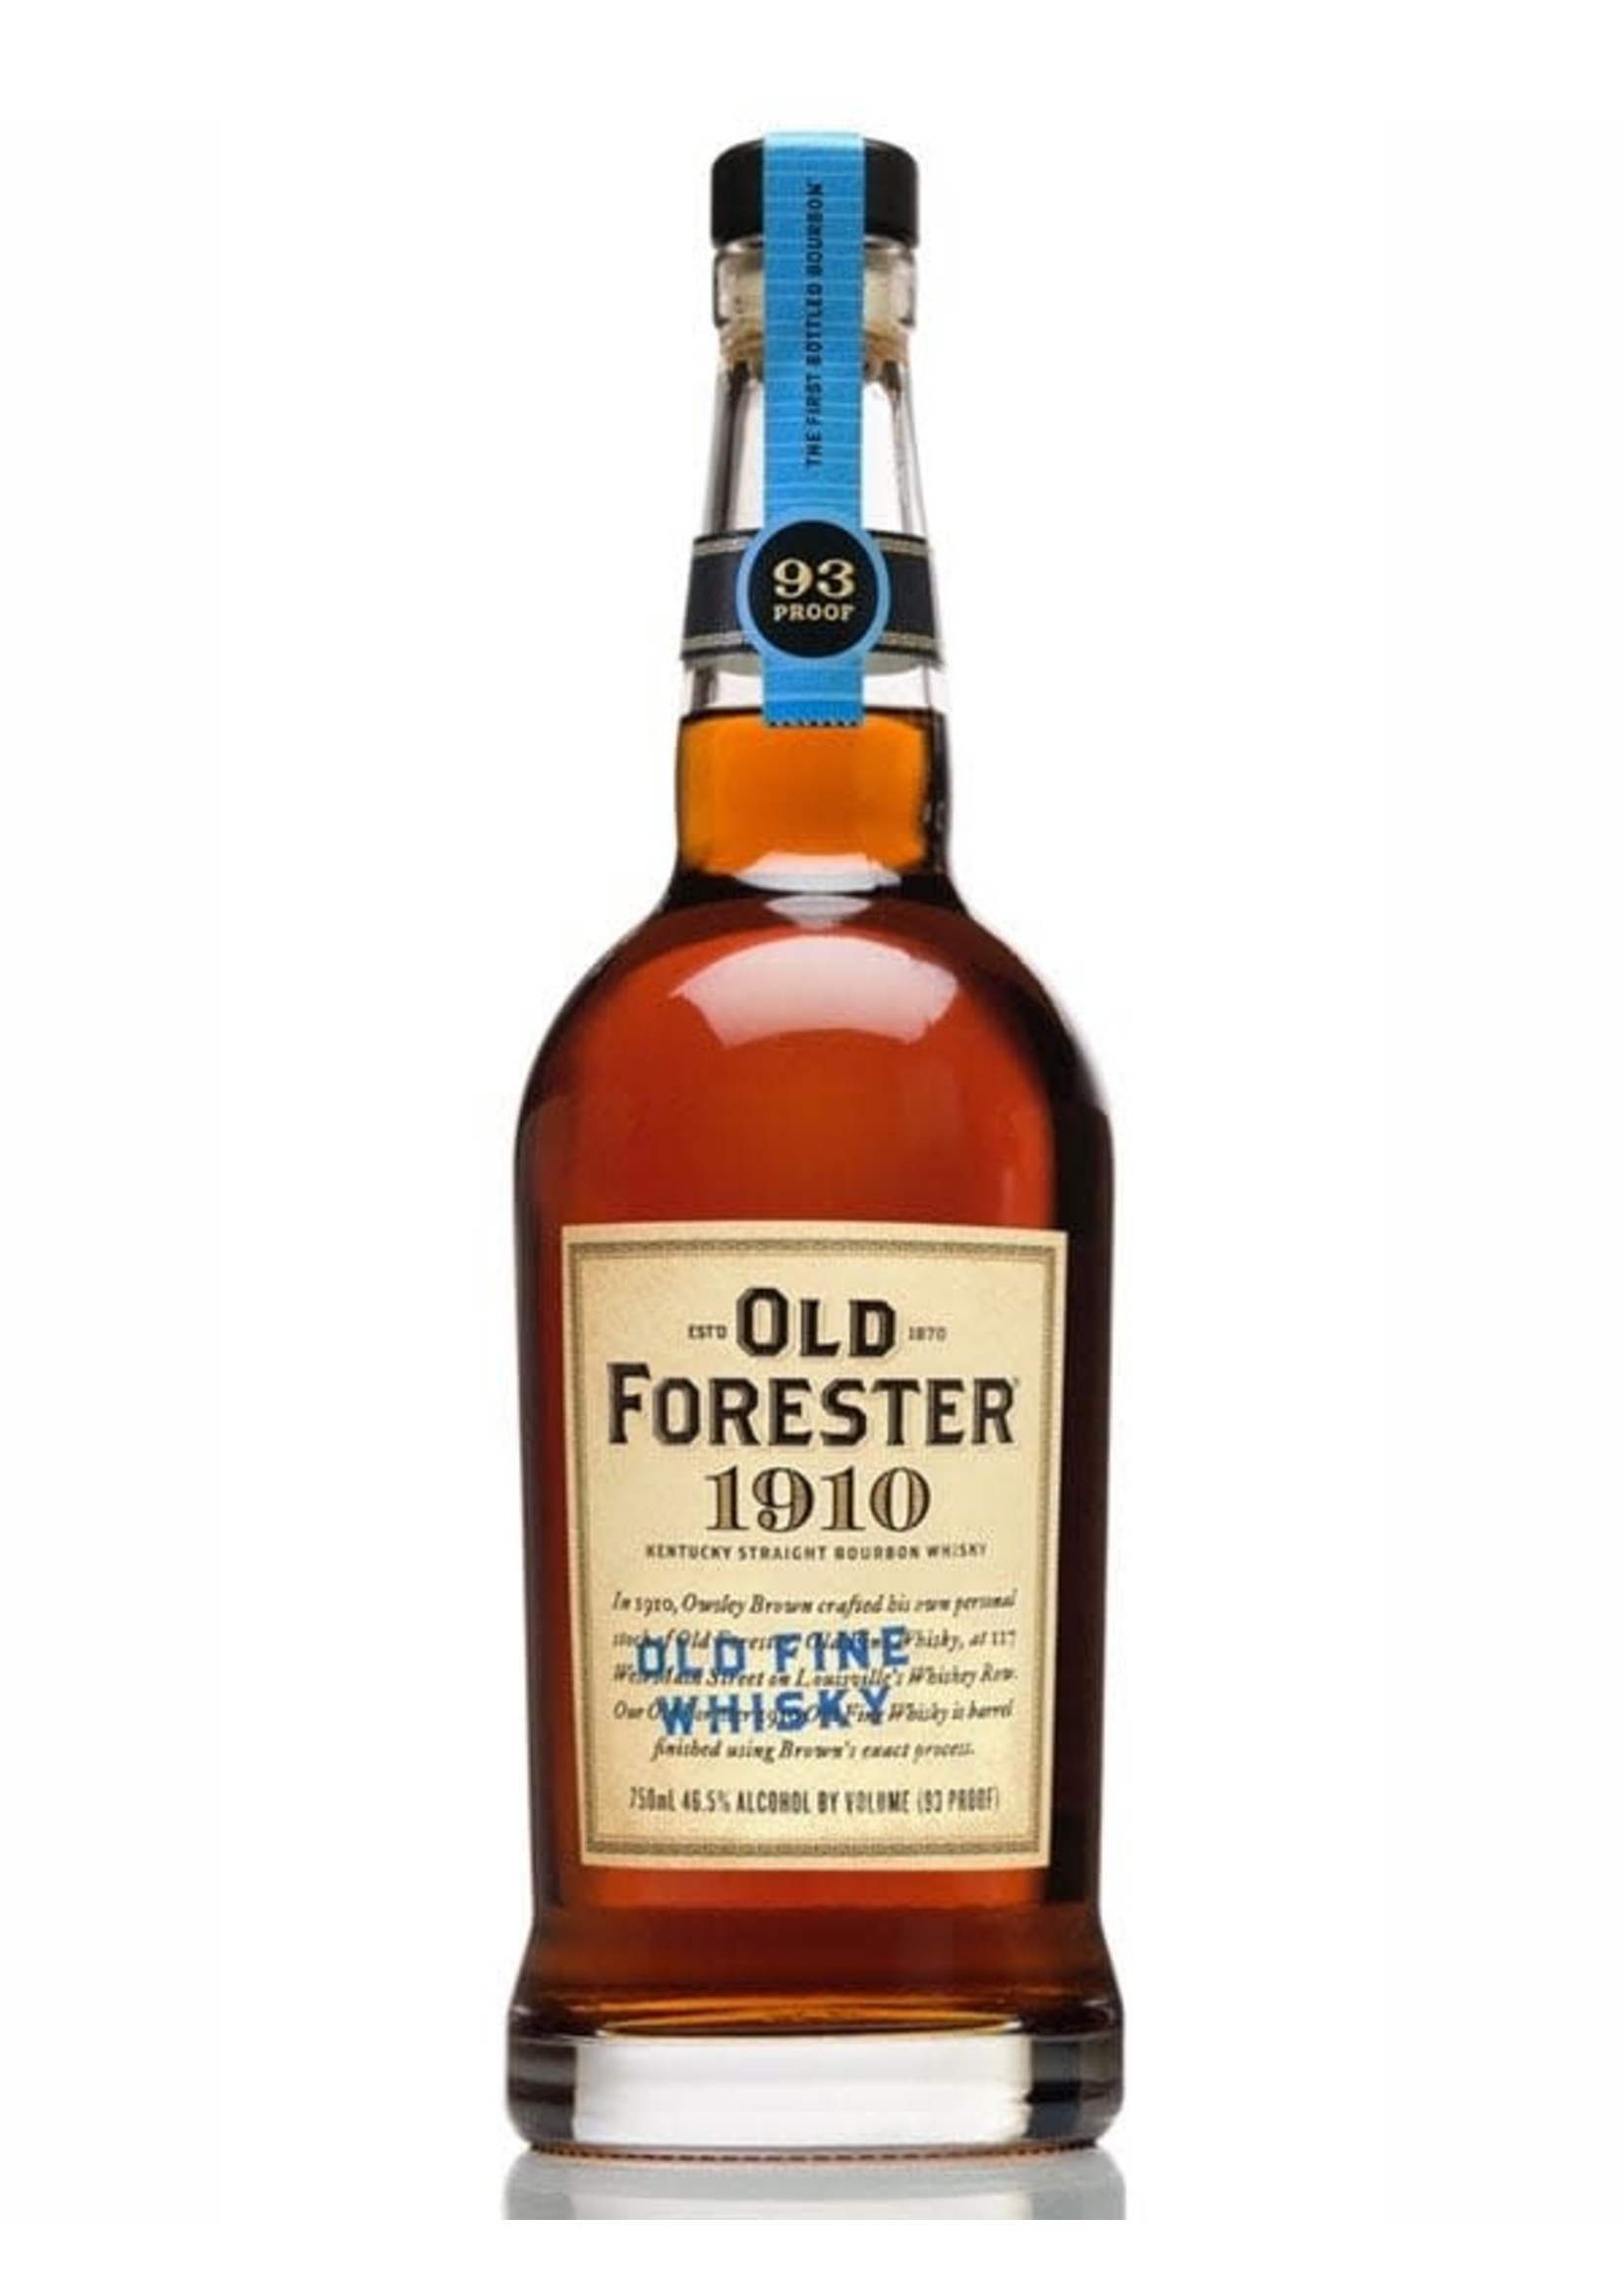 Old Forester Old Foster 1910